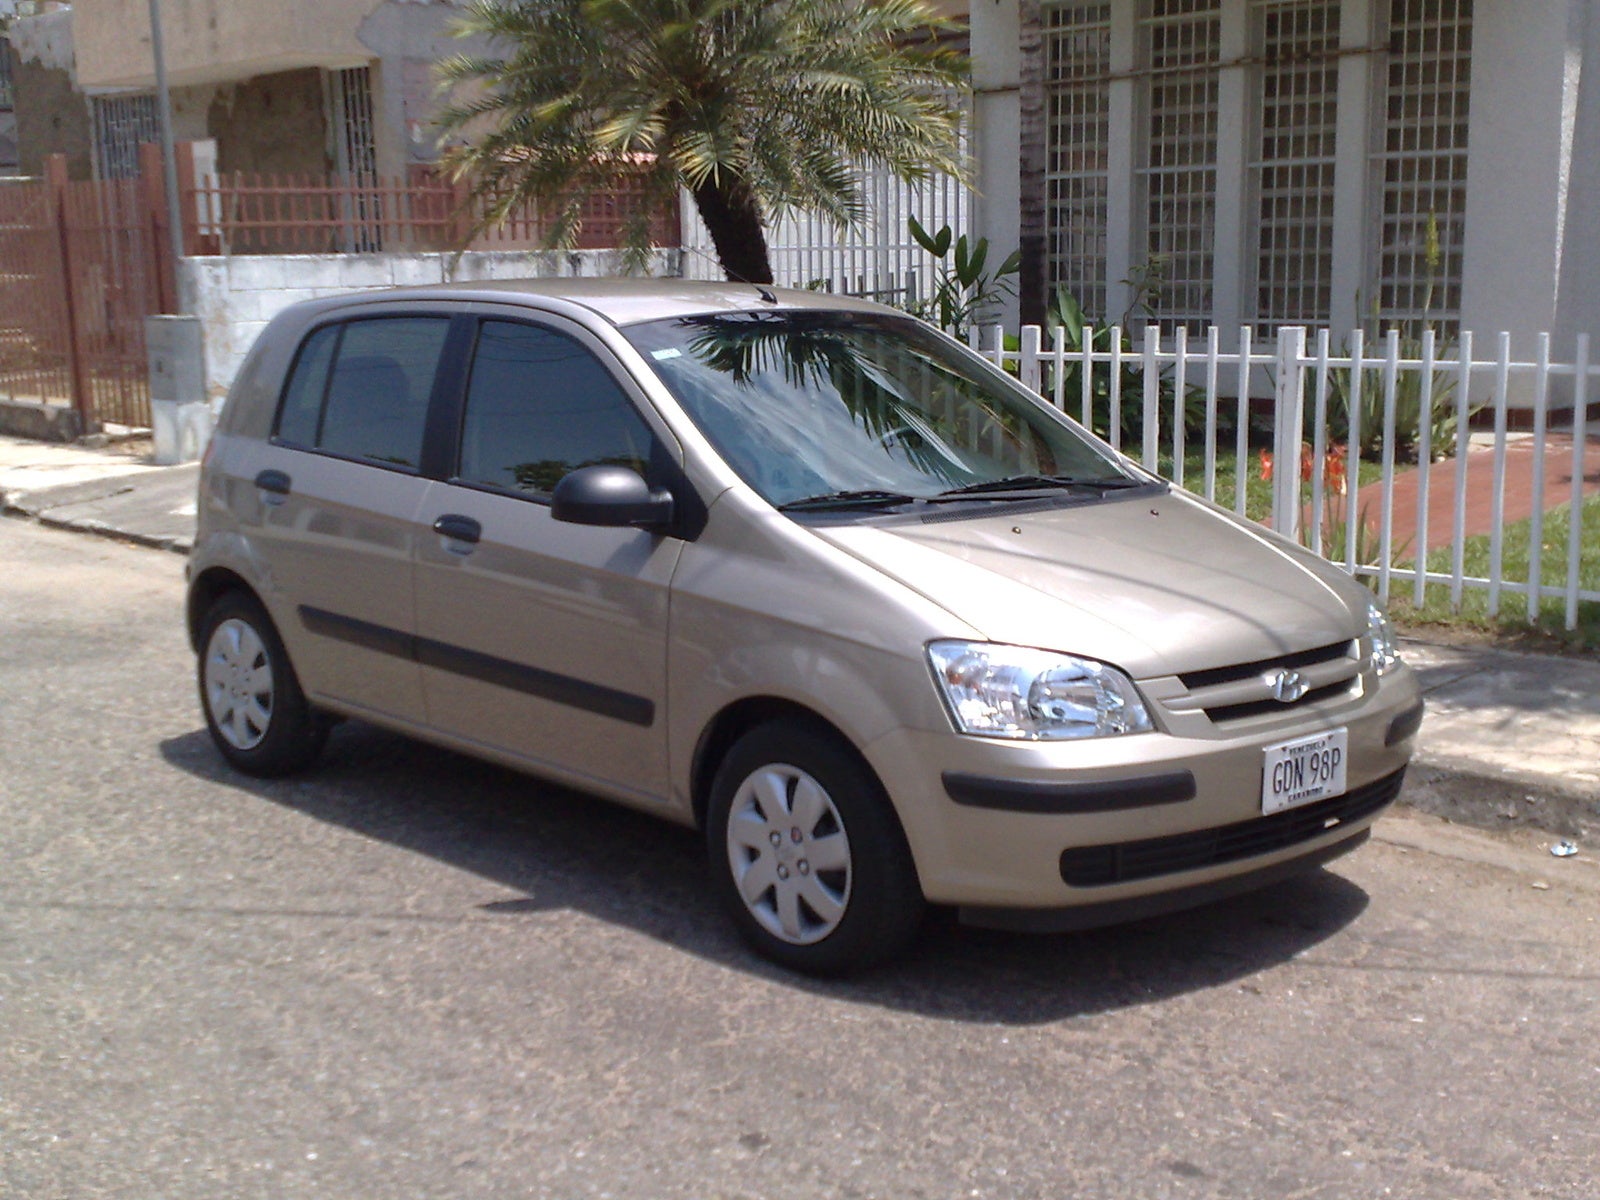 2007 Hyundai Getz 1.6 related infomation,specifications